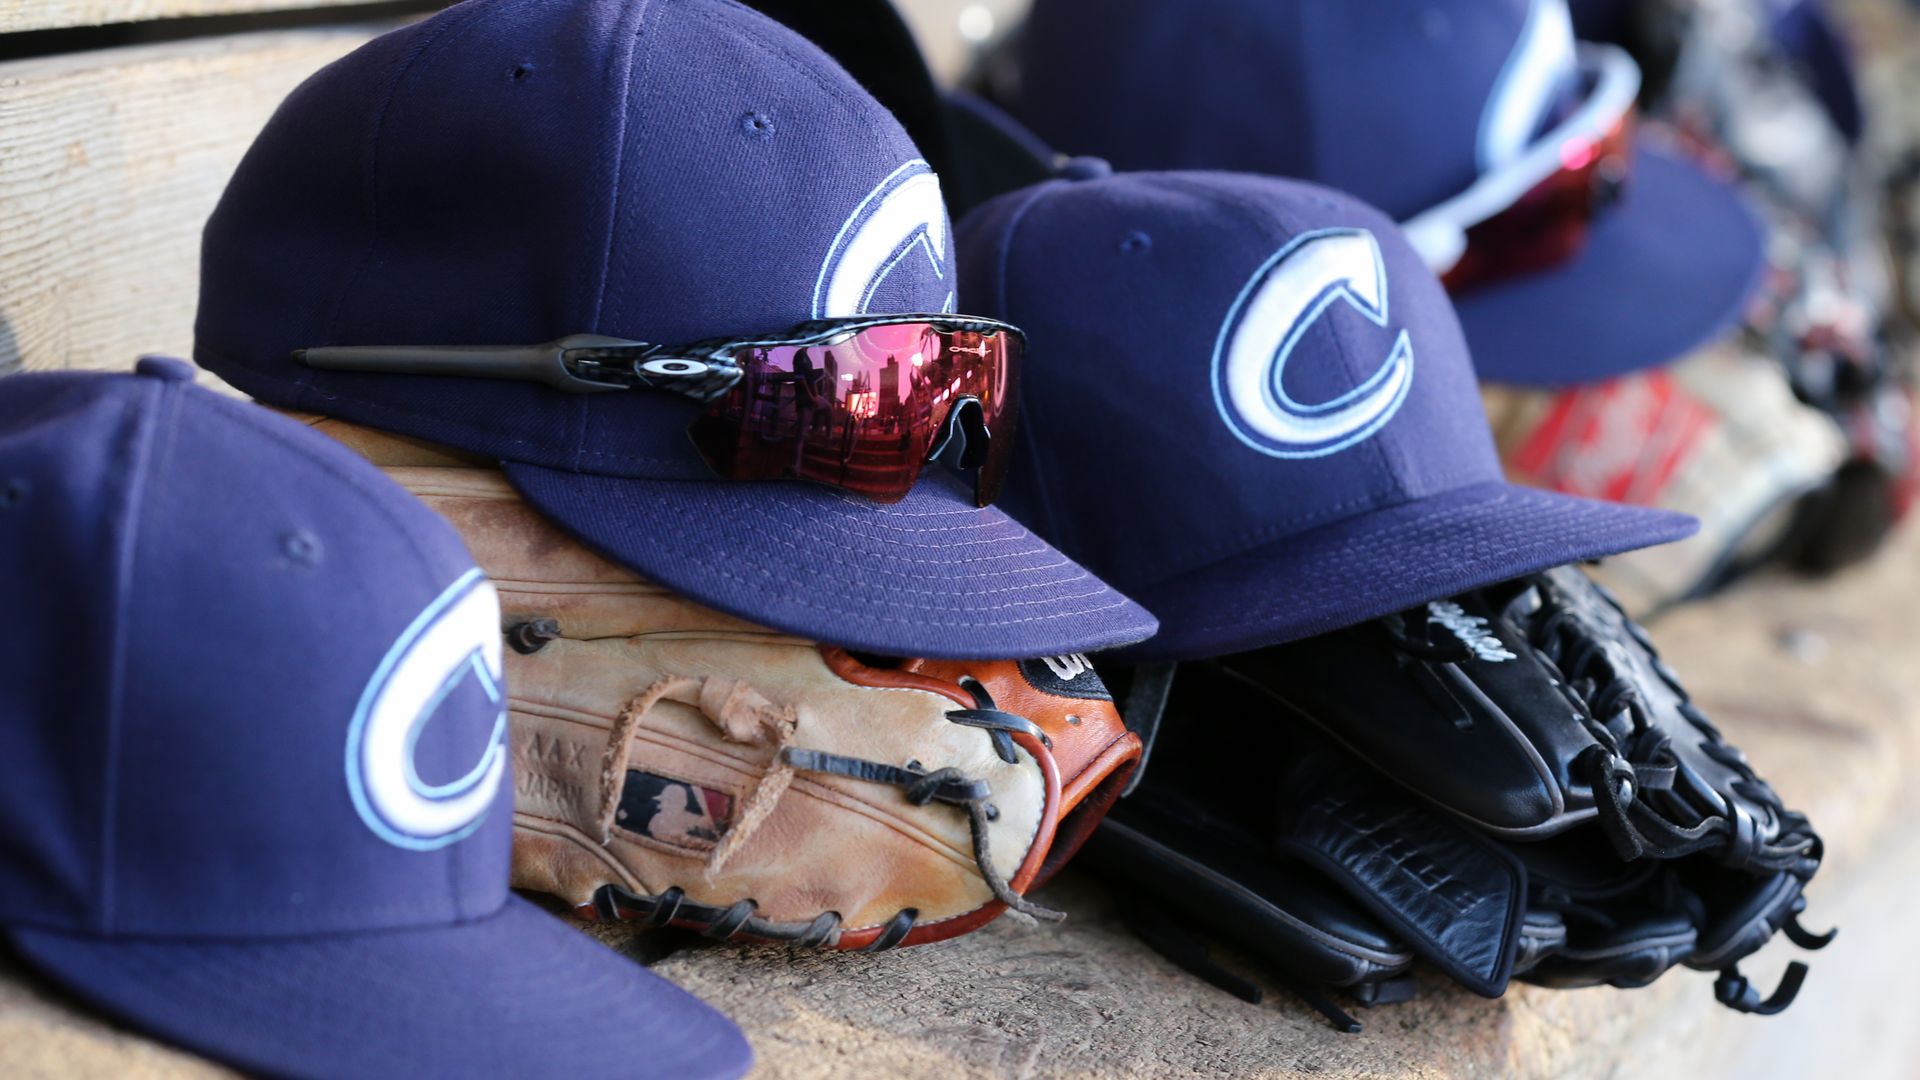 Columbus Clippers baseball hats and gloves on a dugout bench. 